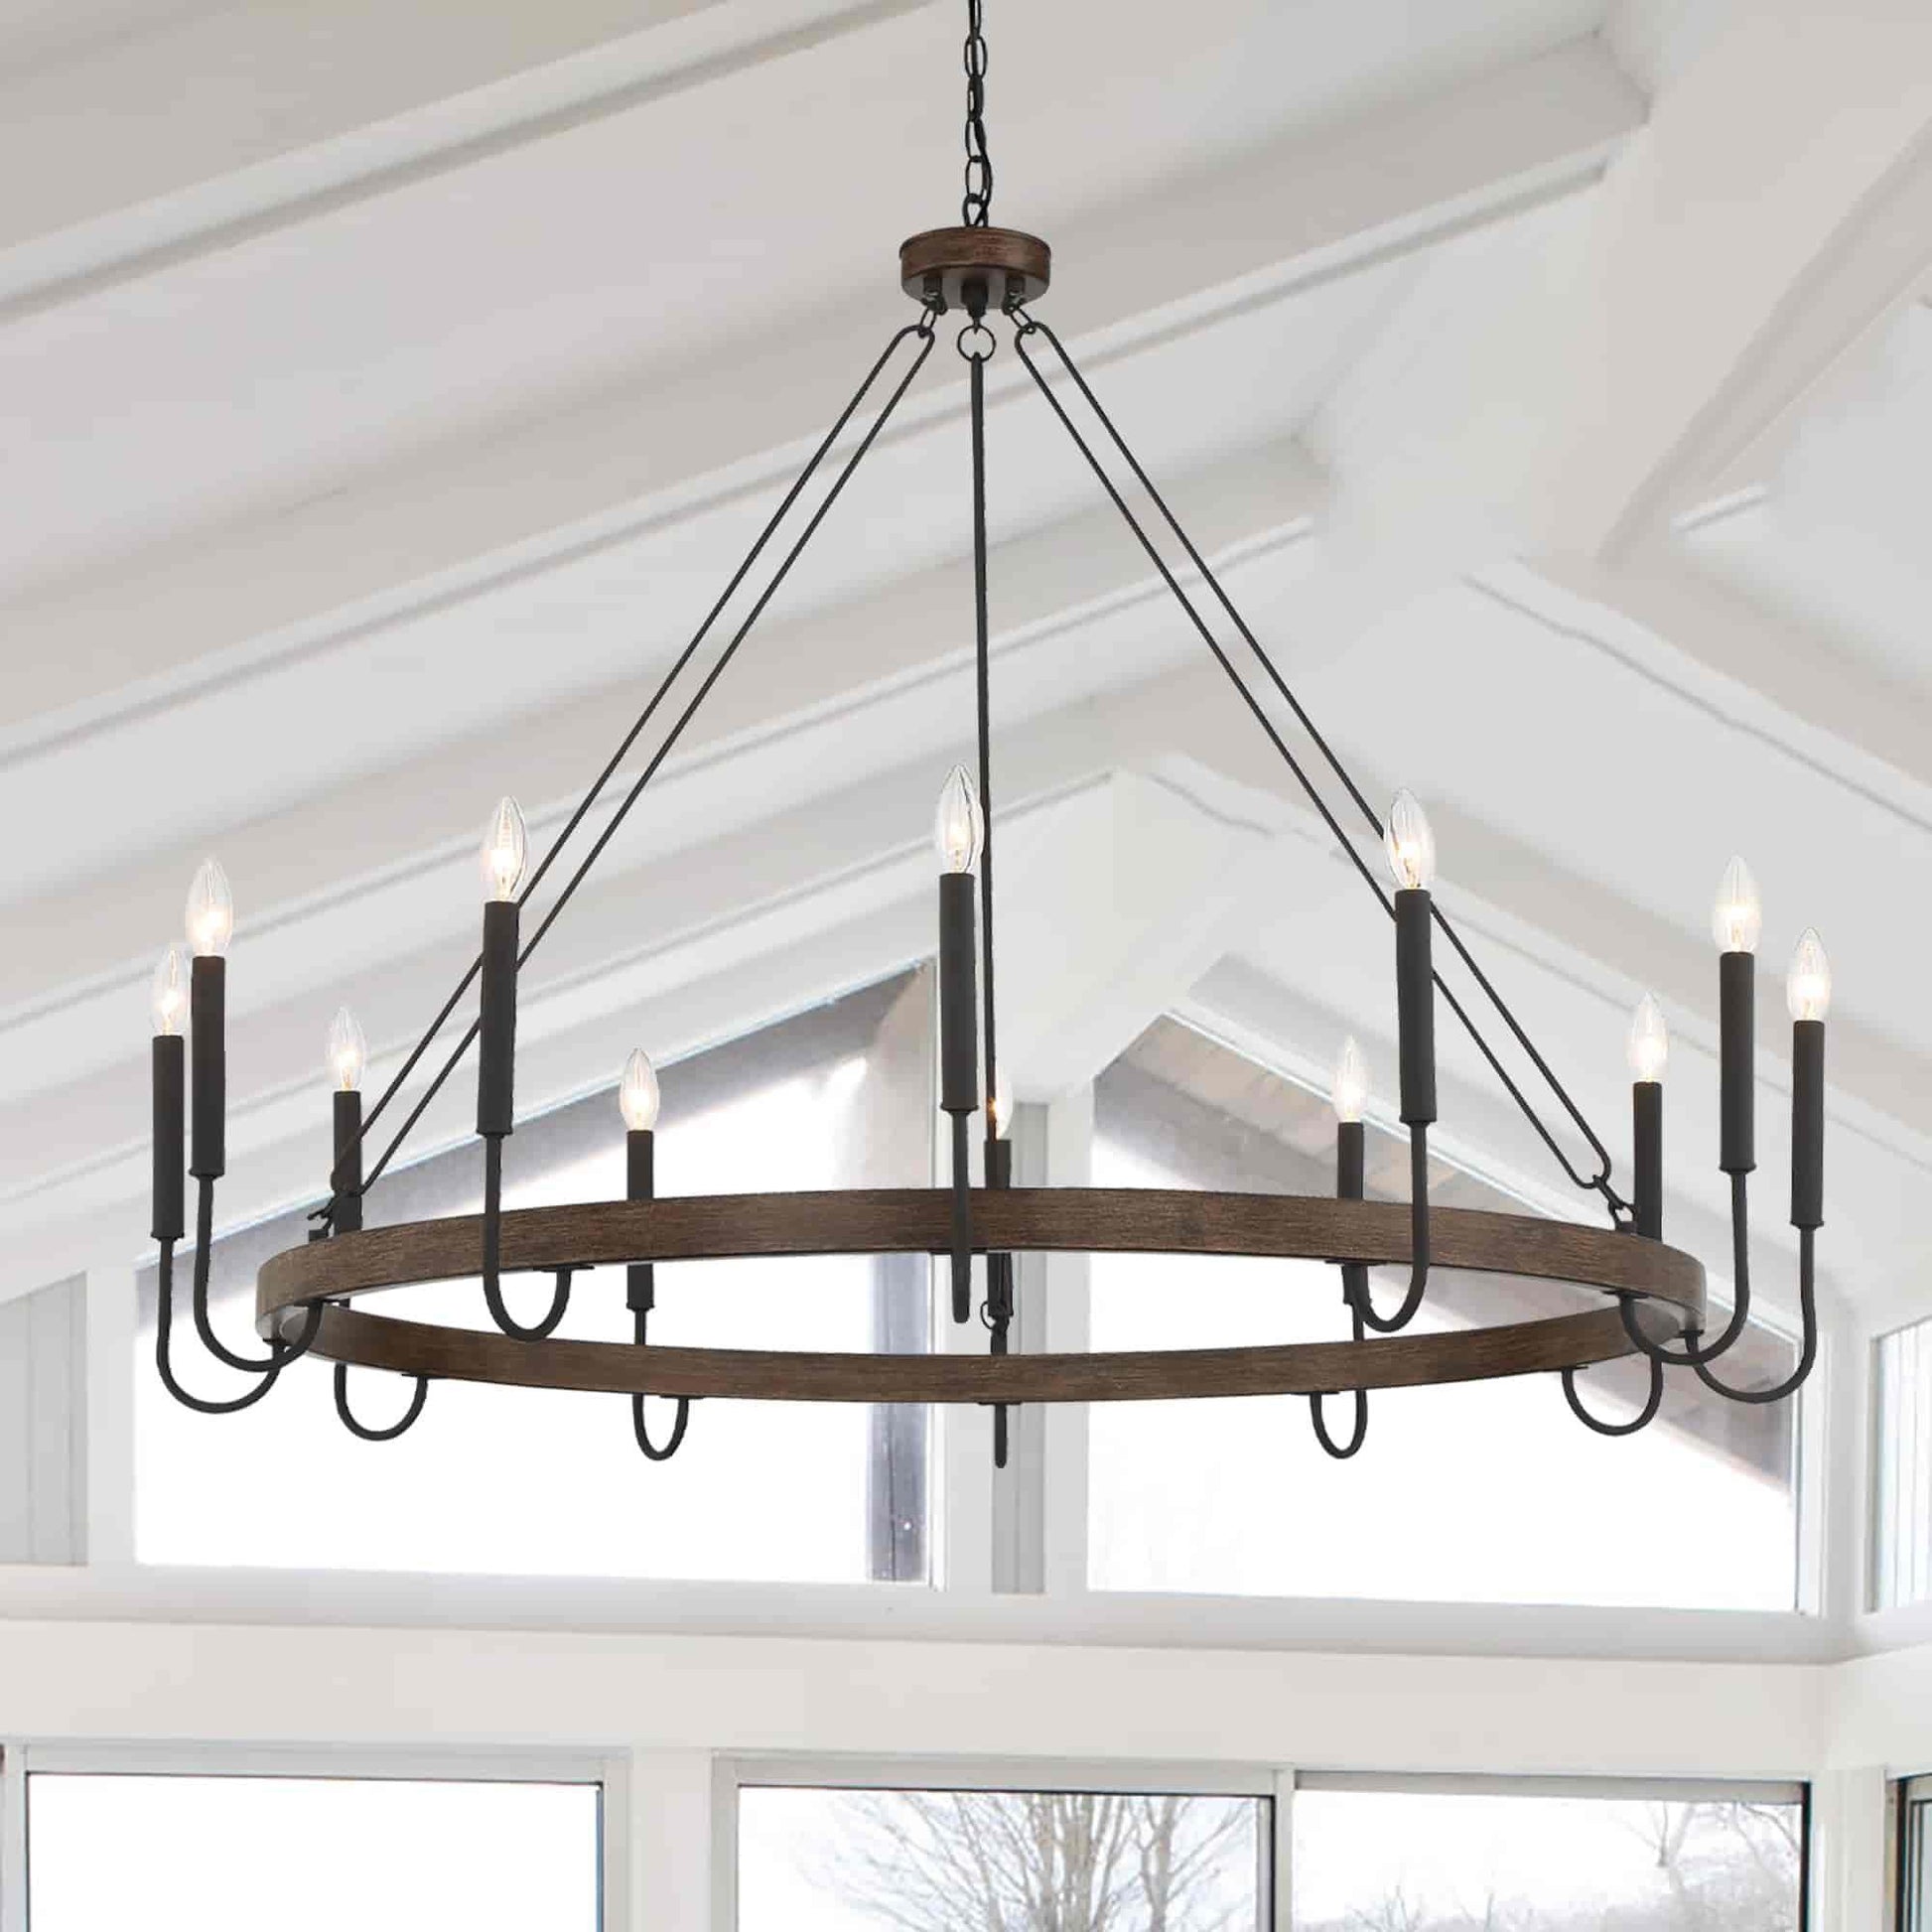 12 light candle style wagon wheel chain chandelier (19) by ACROMA